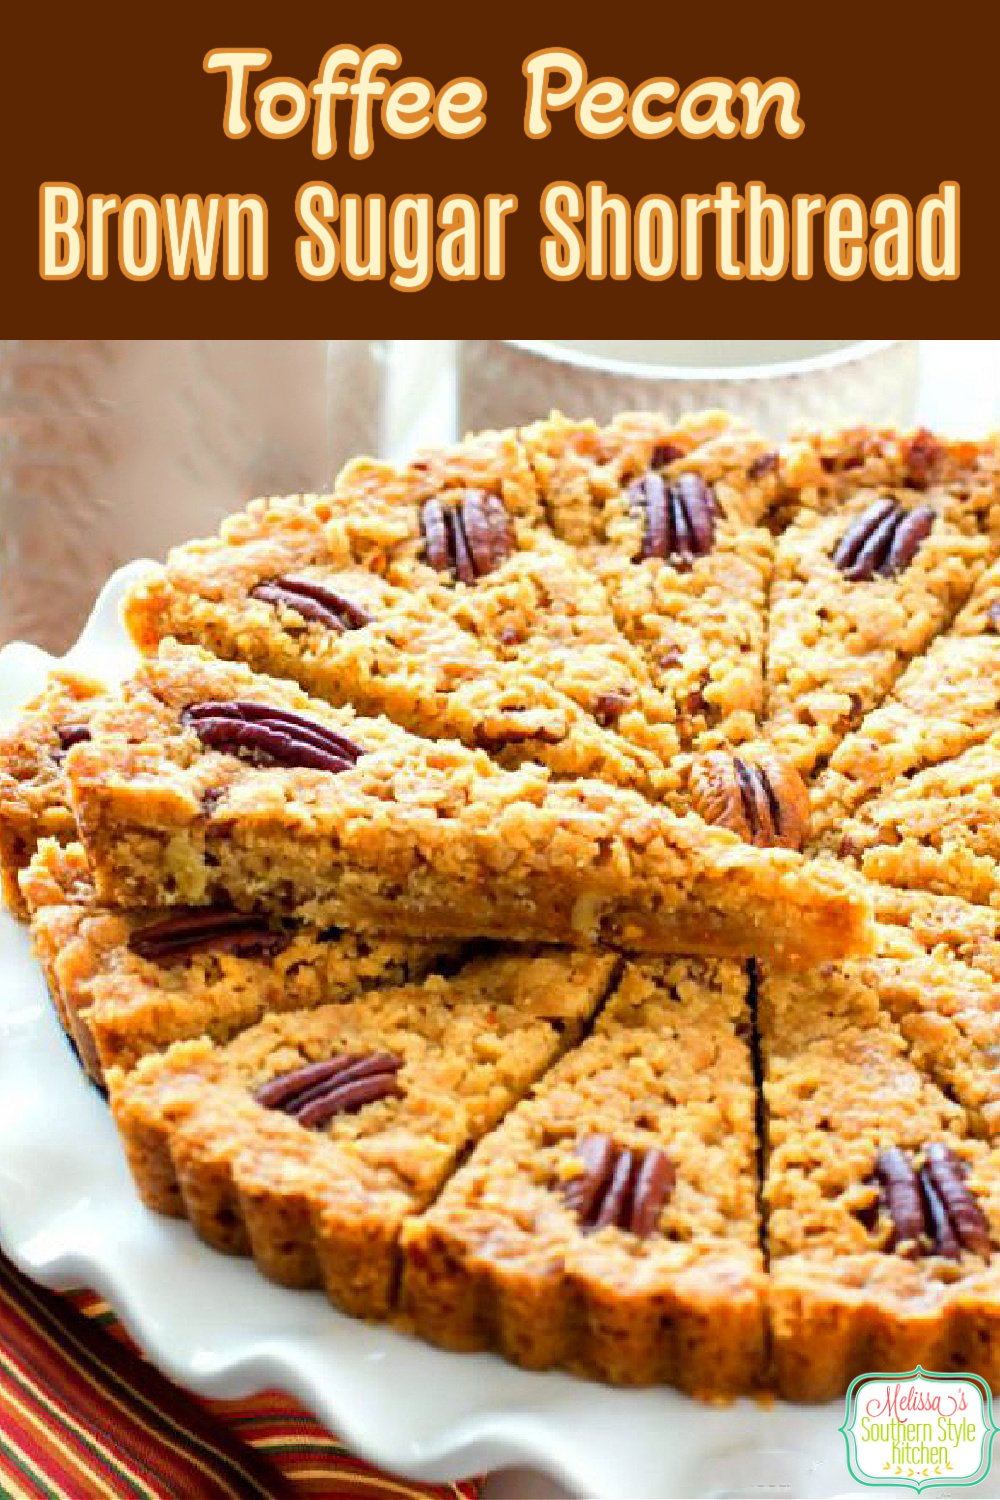 This rich buttery Toffee Pecan Brown Sugar Shortbread is impossible to resist #brownsugarshortbread #pecans #shortbread #toffee #desserts #dessertfoodrecipes #southernfood #southernrecipes #teatime #brunch #holidaybaking